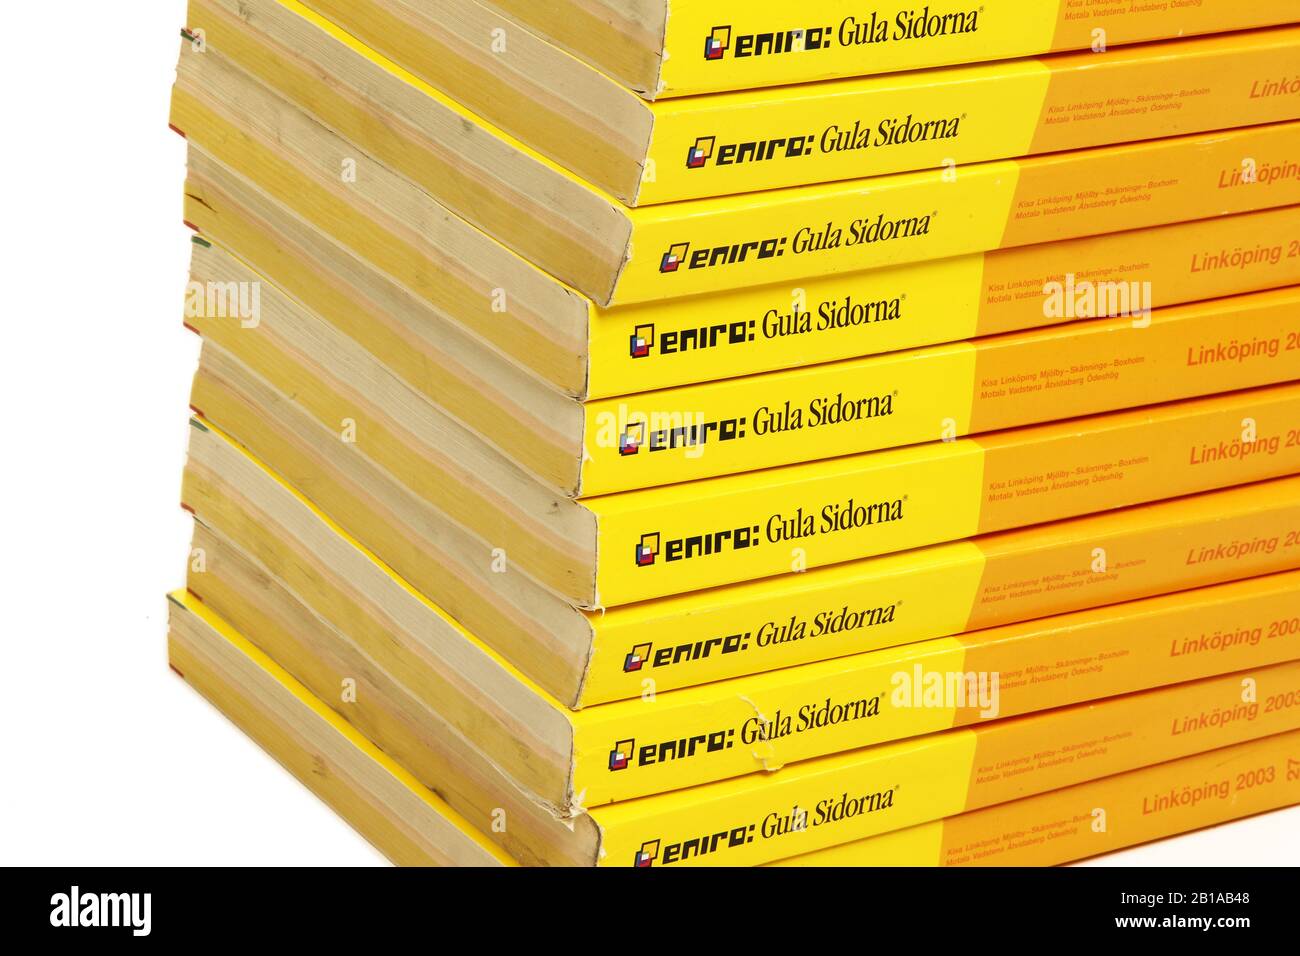 Telephone directories from Eniro. Photo Jeppe Gustafsson Stock Photo